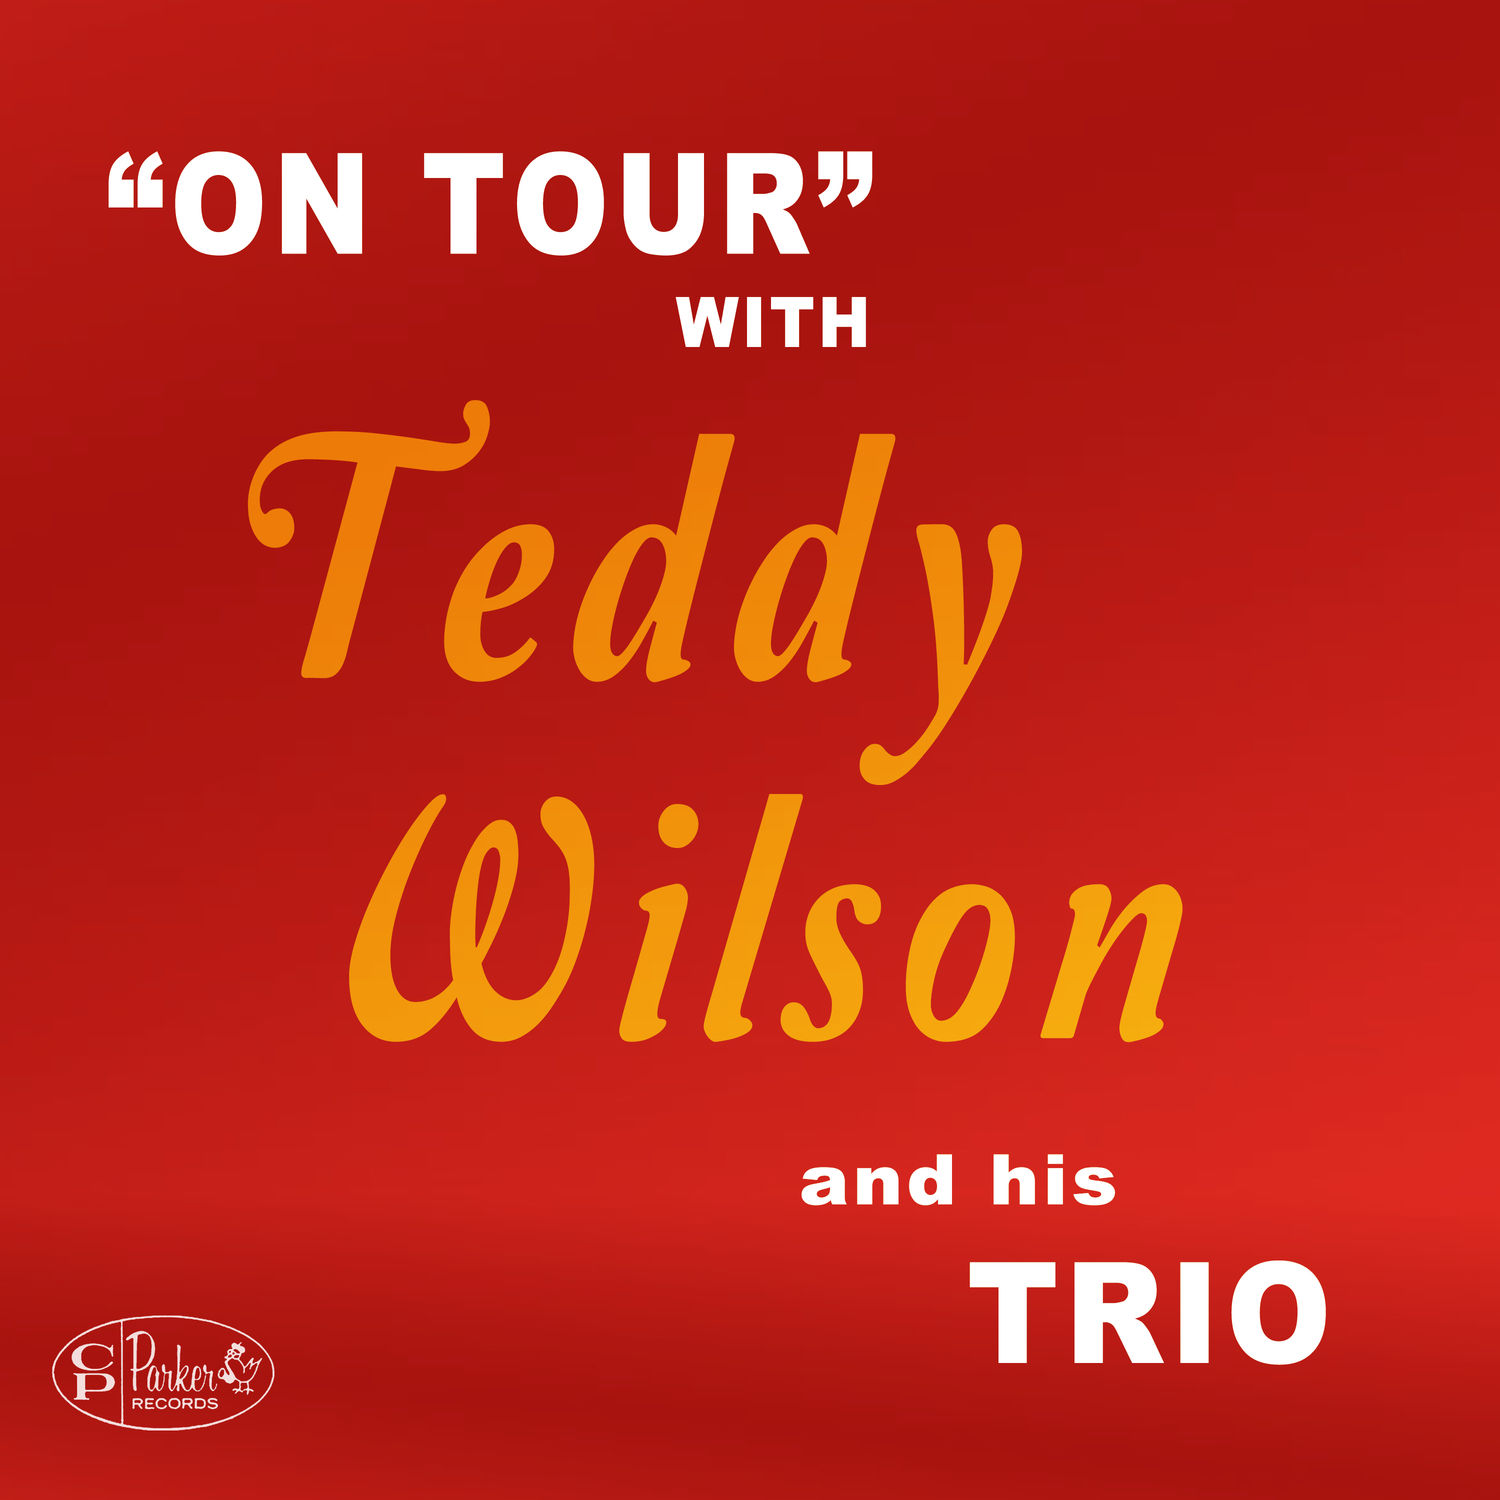 Teddy Wilson Trio – “On Tour” With Teddy Wilson and His Trio (1961/2022) [Official Digital Download 24bit/96kHz]